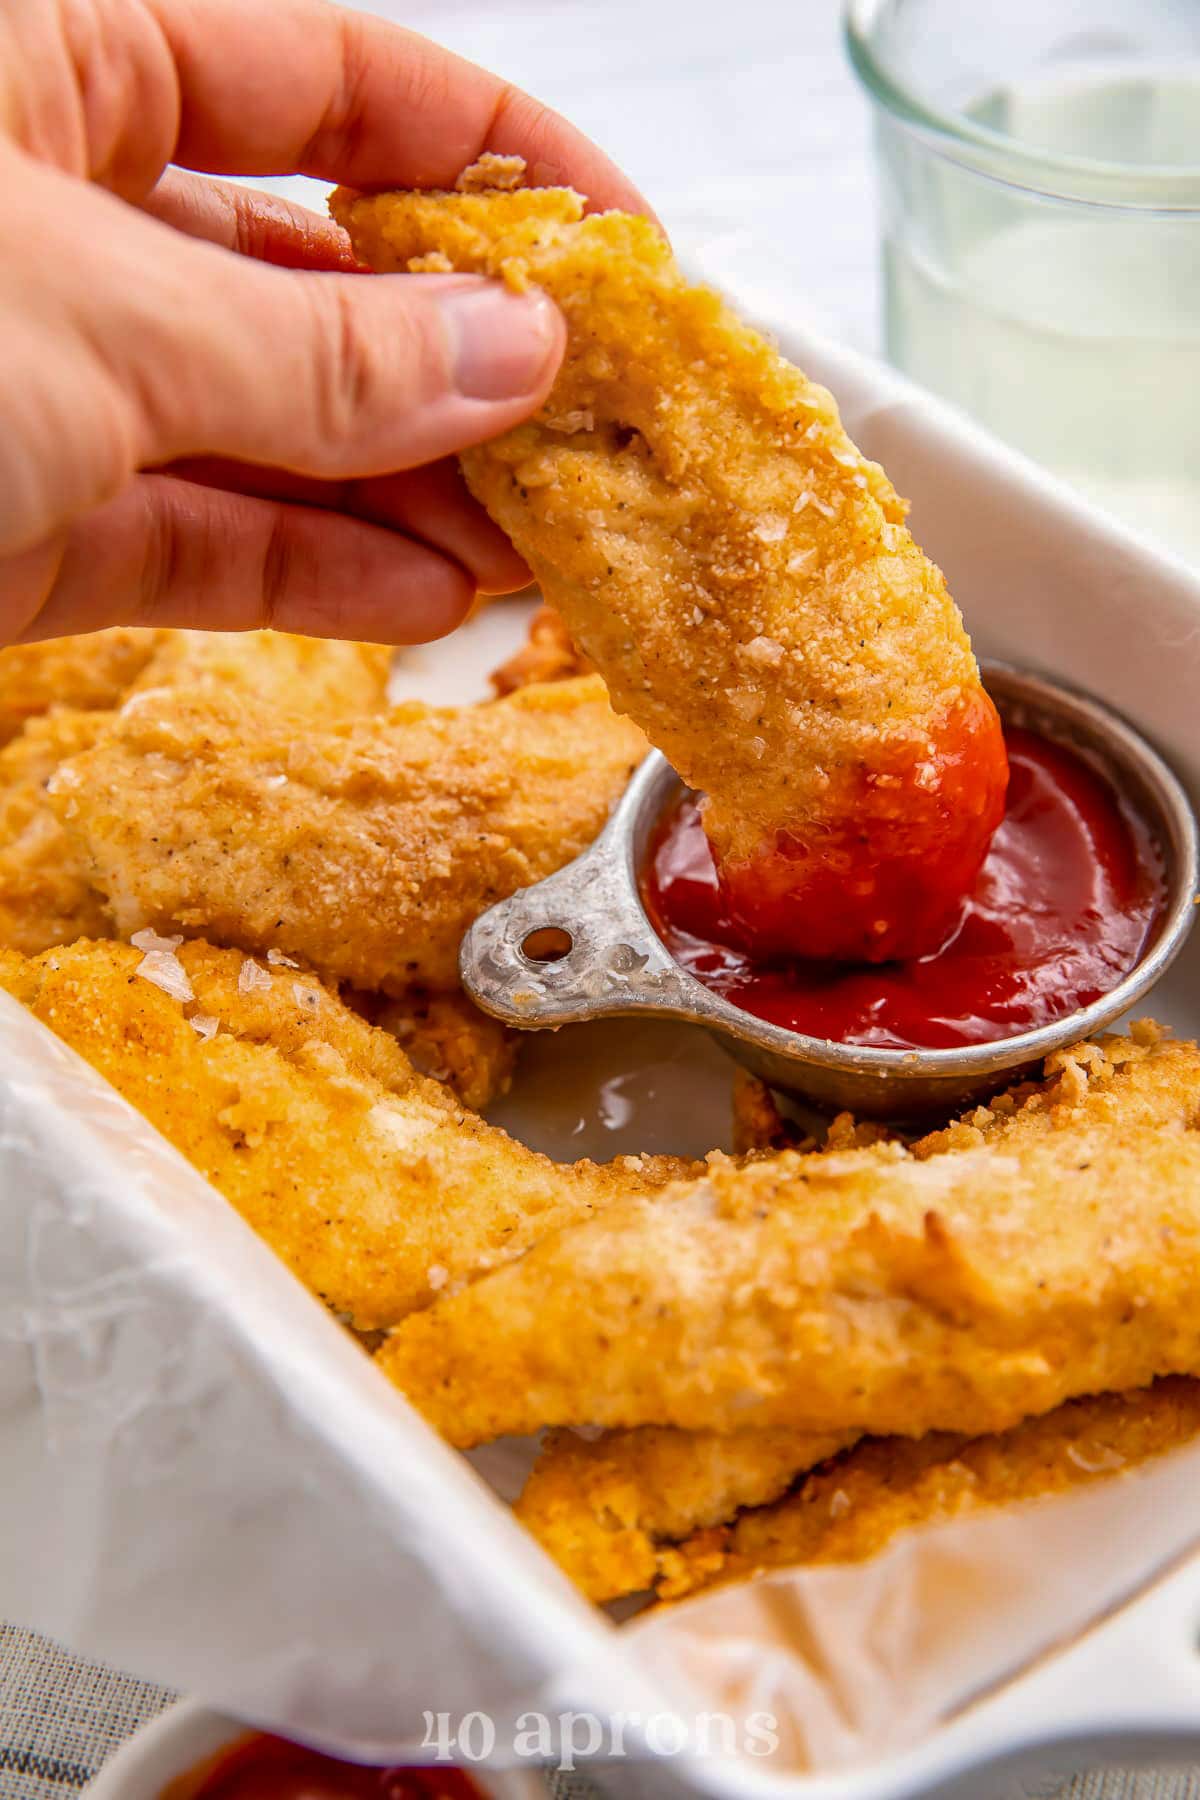 A Whole30 chicken tender being dipped into a ramekin of ketchup in a tray surrounded by other chicken tenders.